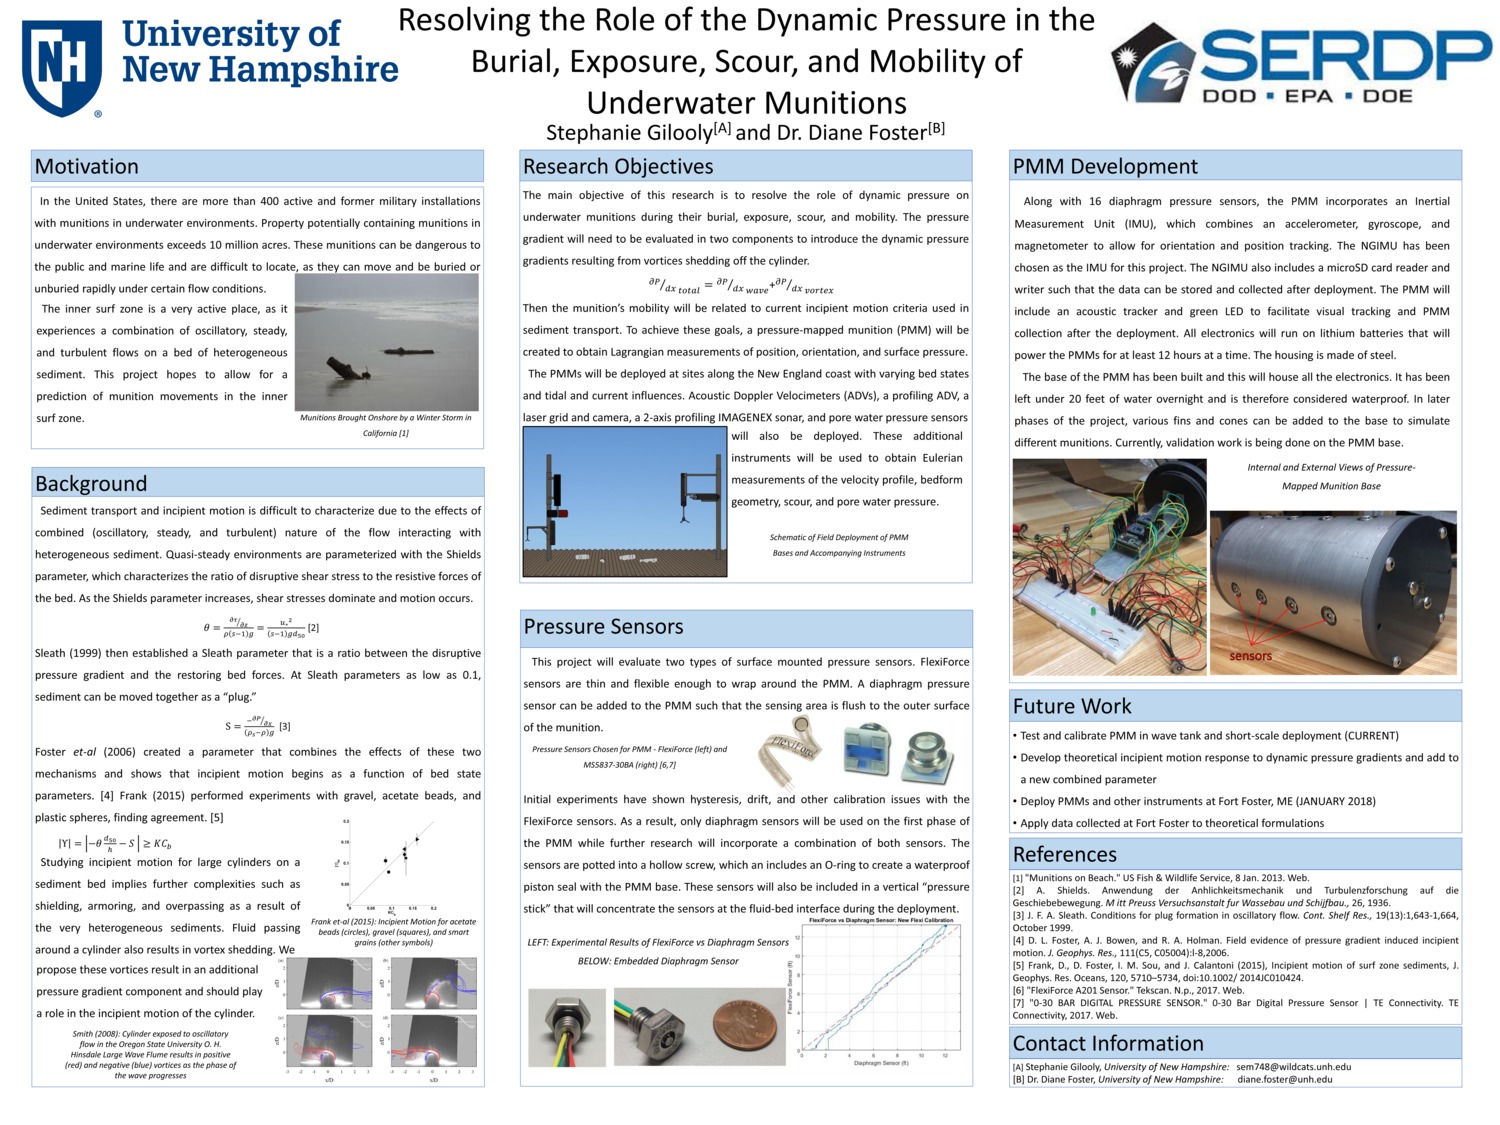 Resolving The Role Of The Dynamic Pressure In The Burial, Exposure, Scour, And Mobility Of Underwater Munitions by sgilooly